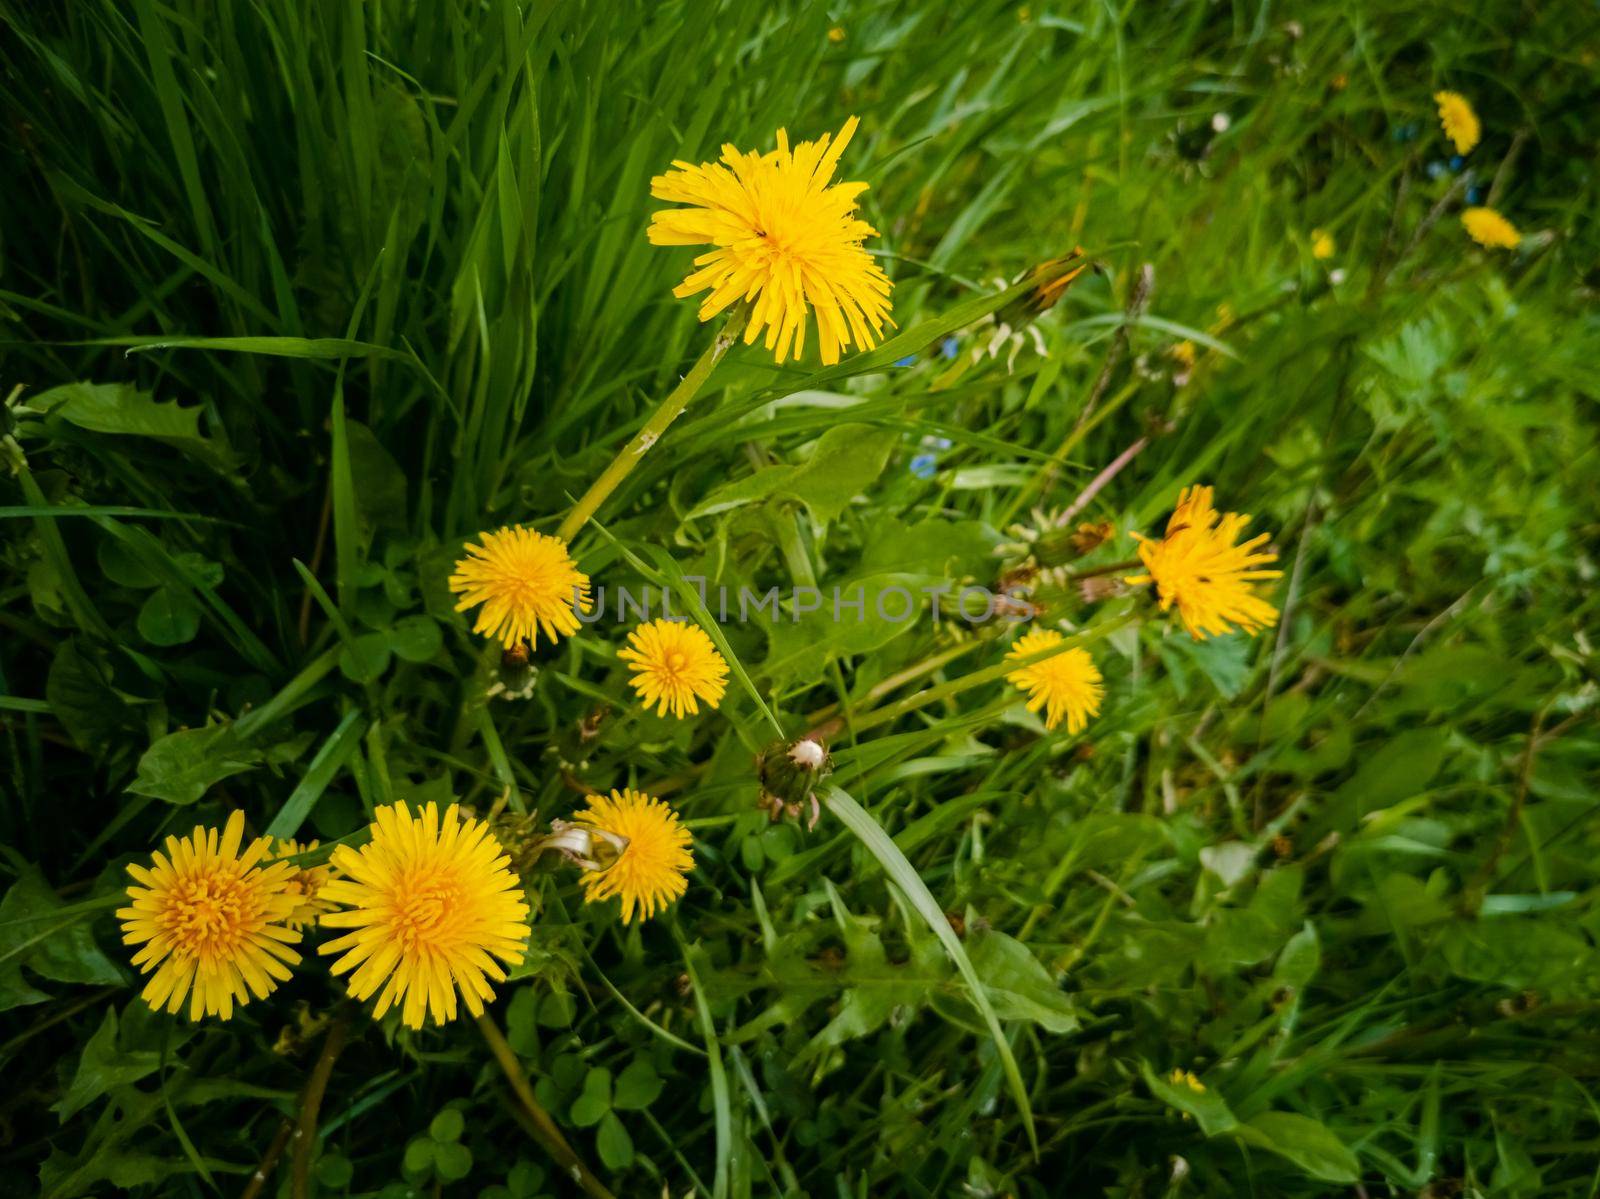 yellow blooming dandelions in green grass. close-up. summer background by Mariaprovector